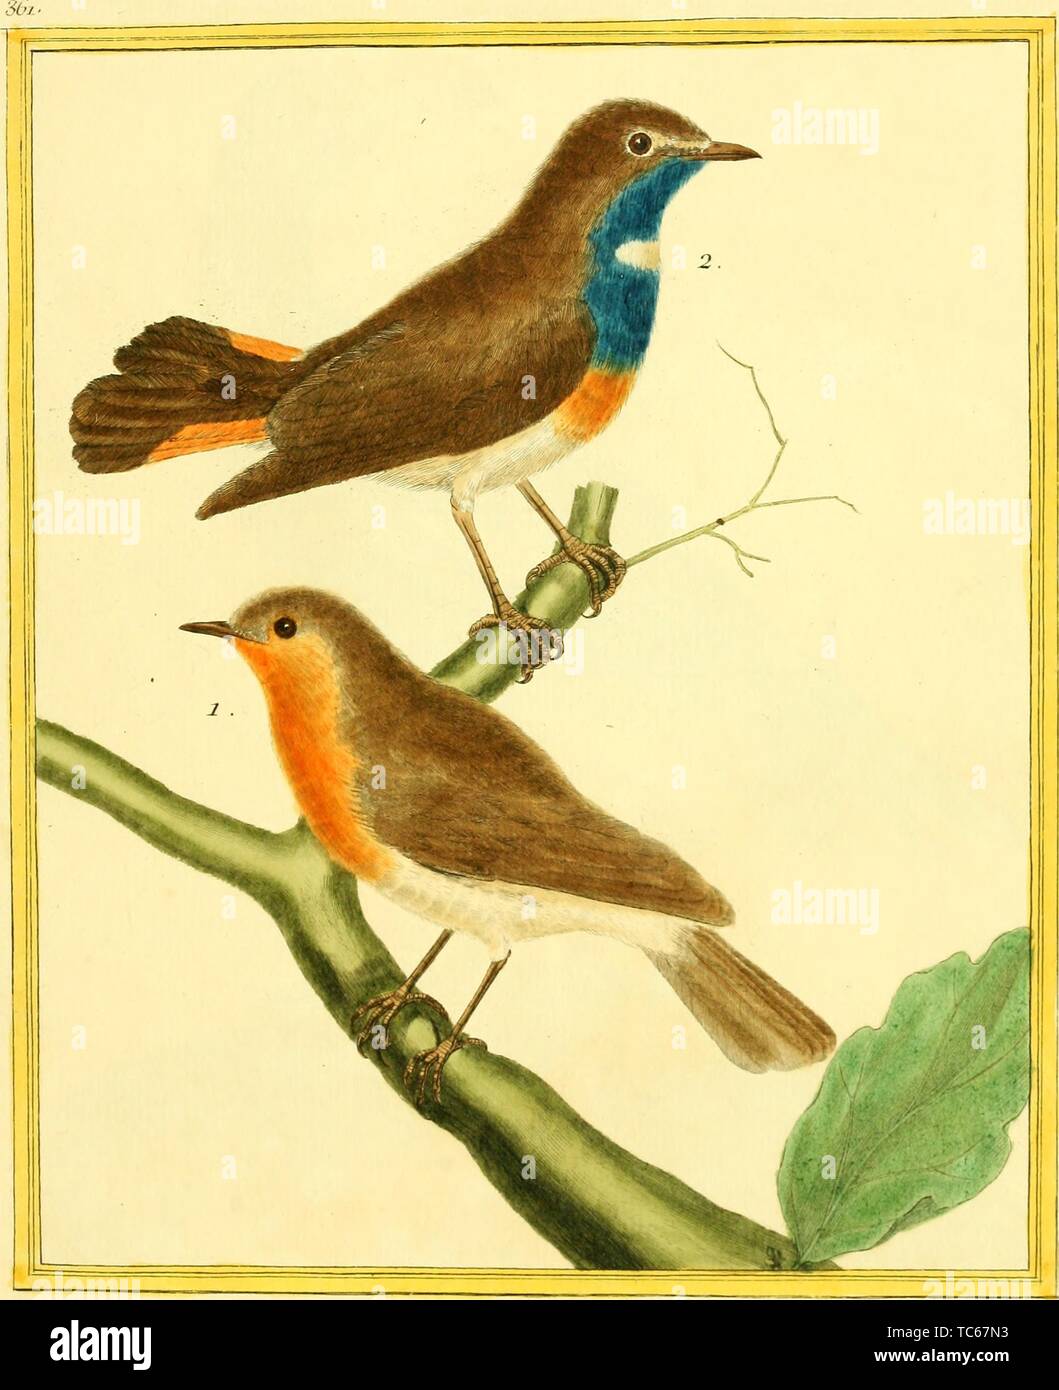 Engraved drawings of the Redthroat (Pyrrholaemus brunneus) and Bluethroat (Luscinia svecica), from the book 'Planches enluminees Dhistoire naturelle' by Francois Nicolas, Louis Jean Marie Daubenton, and Edme-Louis Daubenton, 1765. Courtesy Internet Archive. () Stock Photo